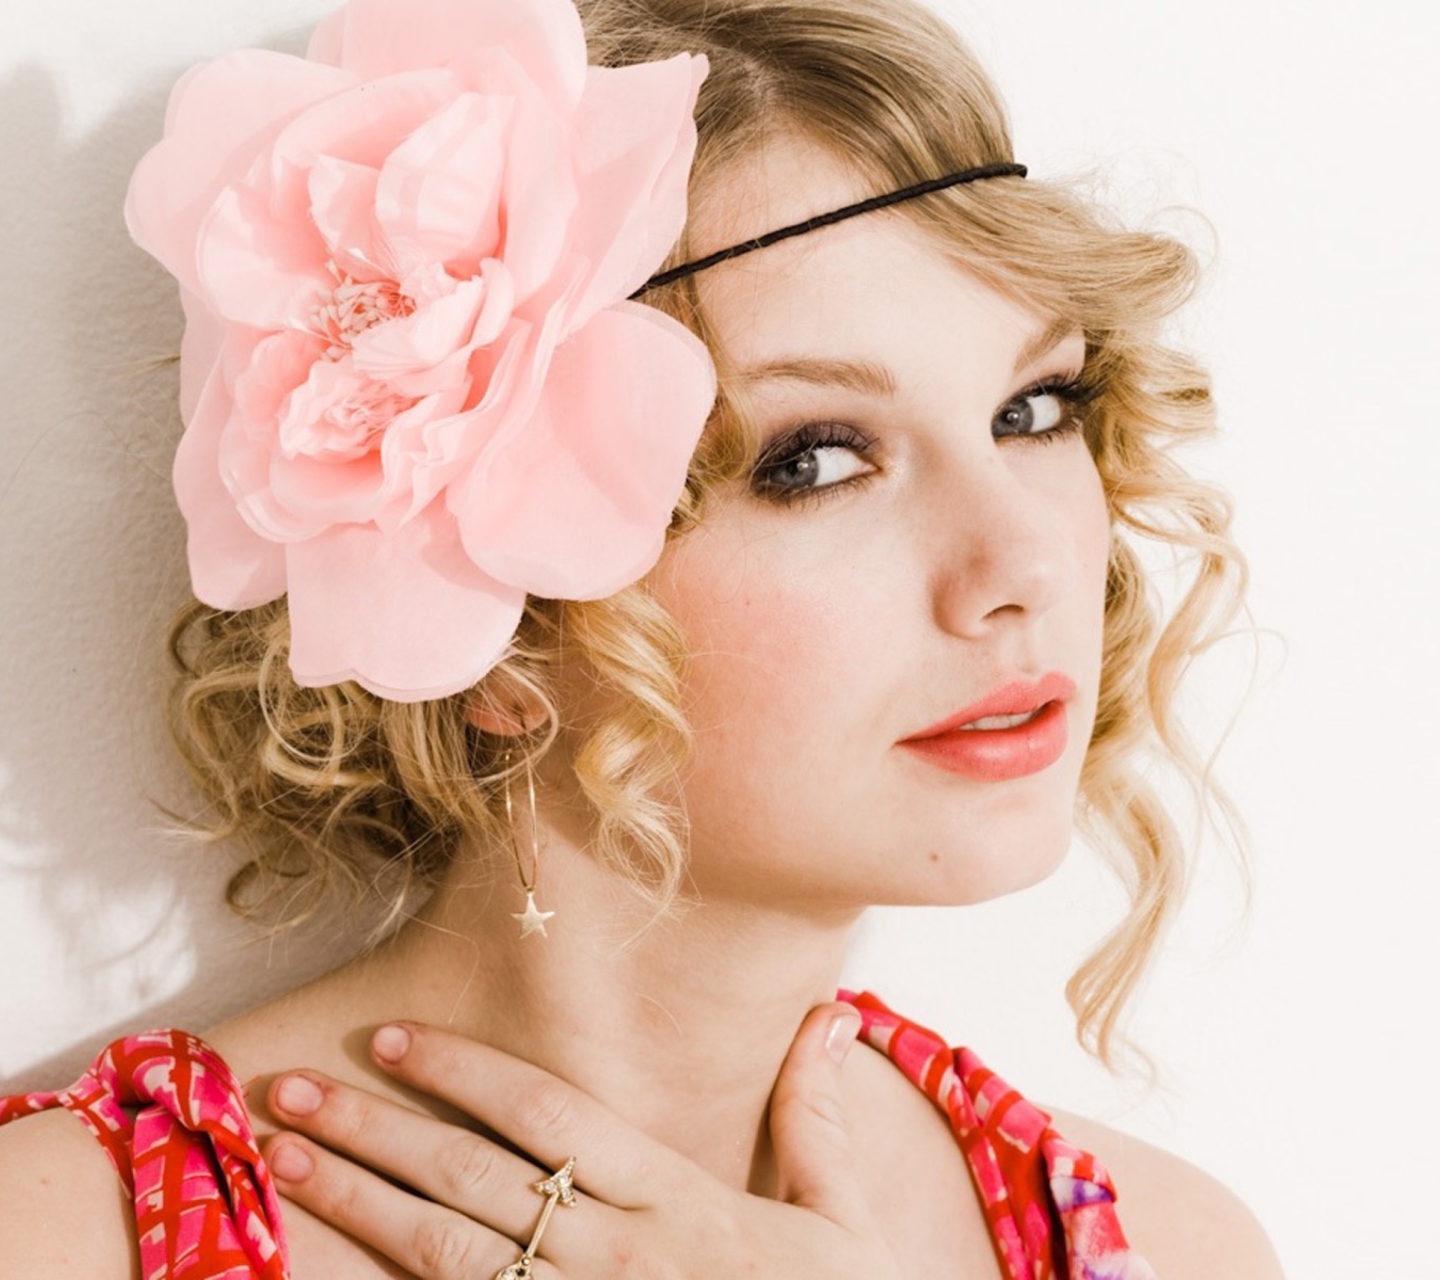 Das Taylor Swift With Pink Rose On Head Wallpaper 1440x1280